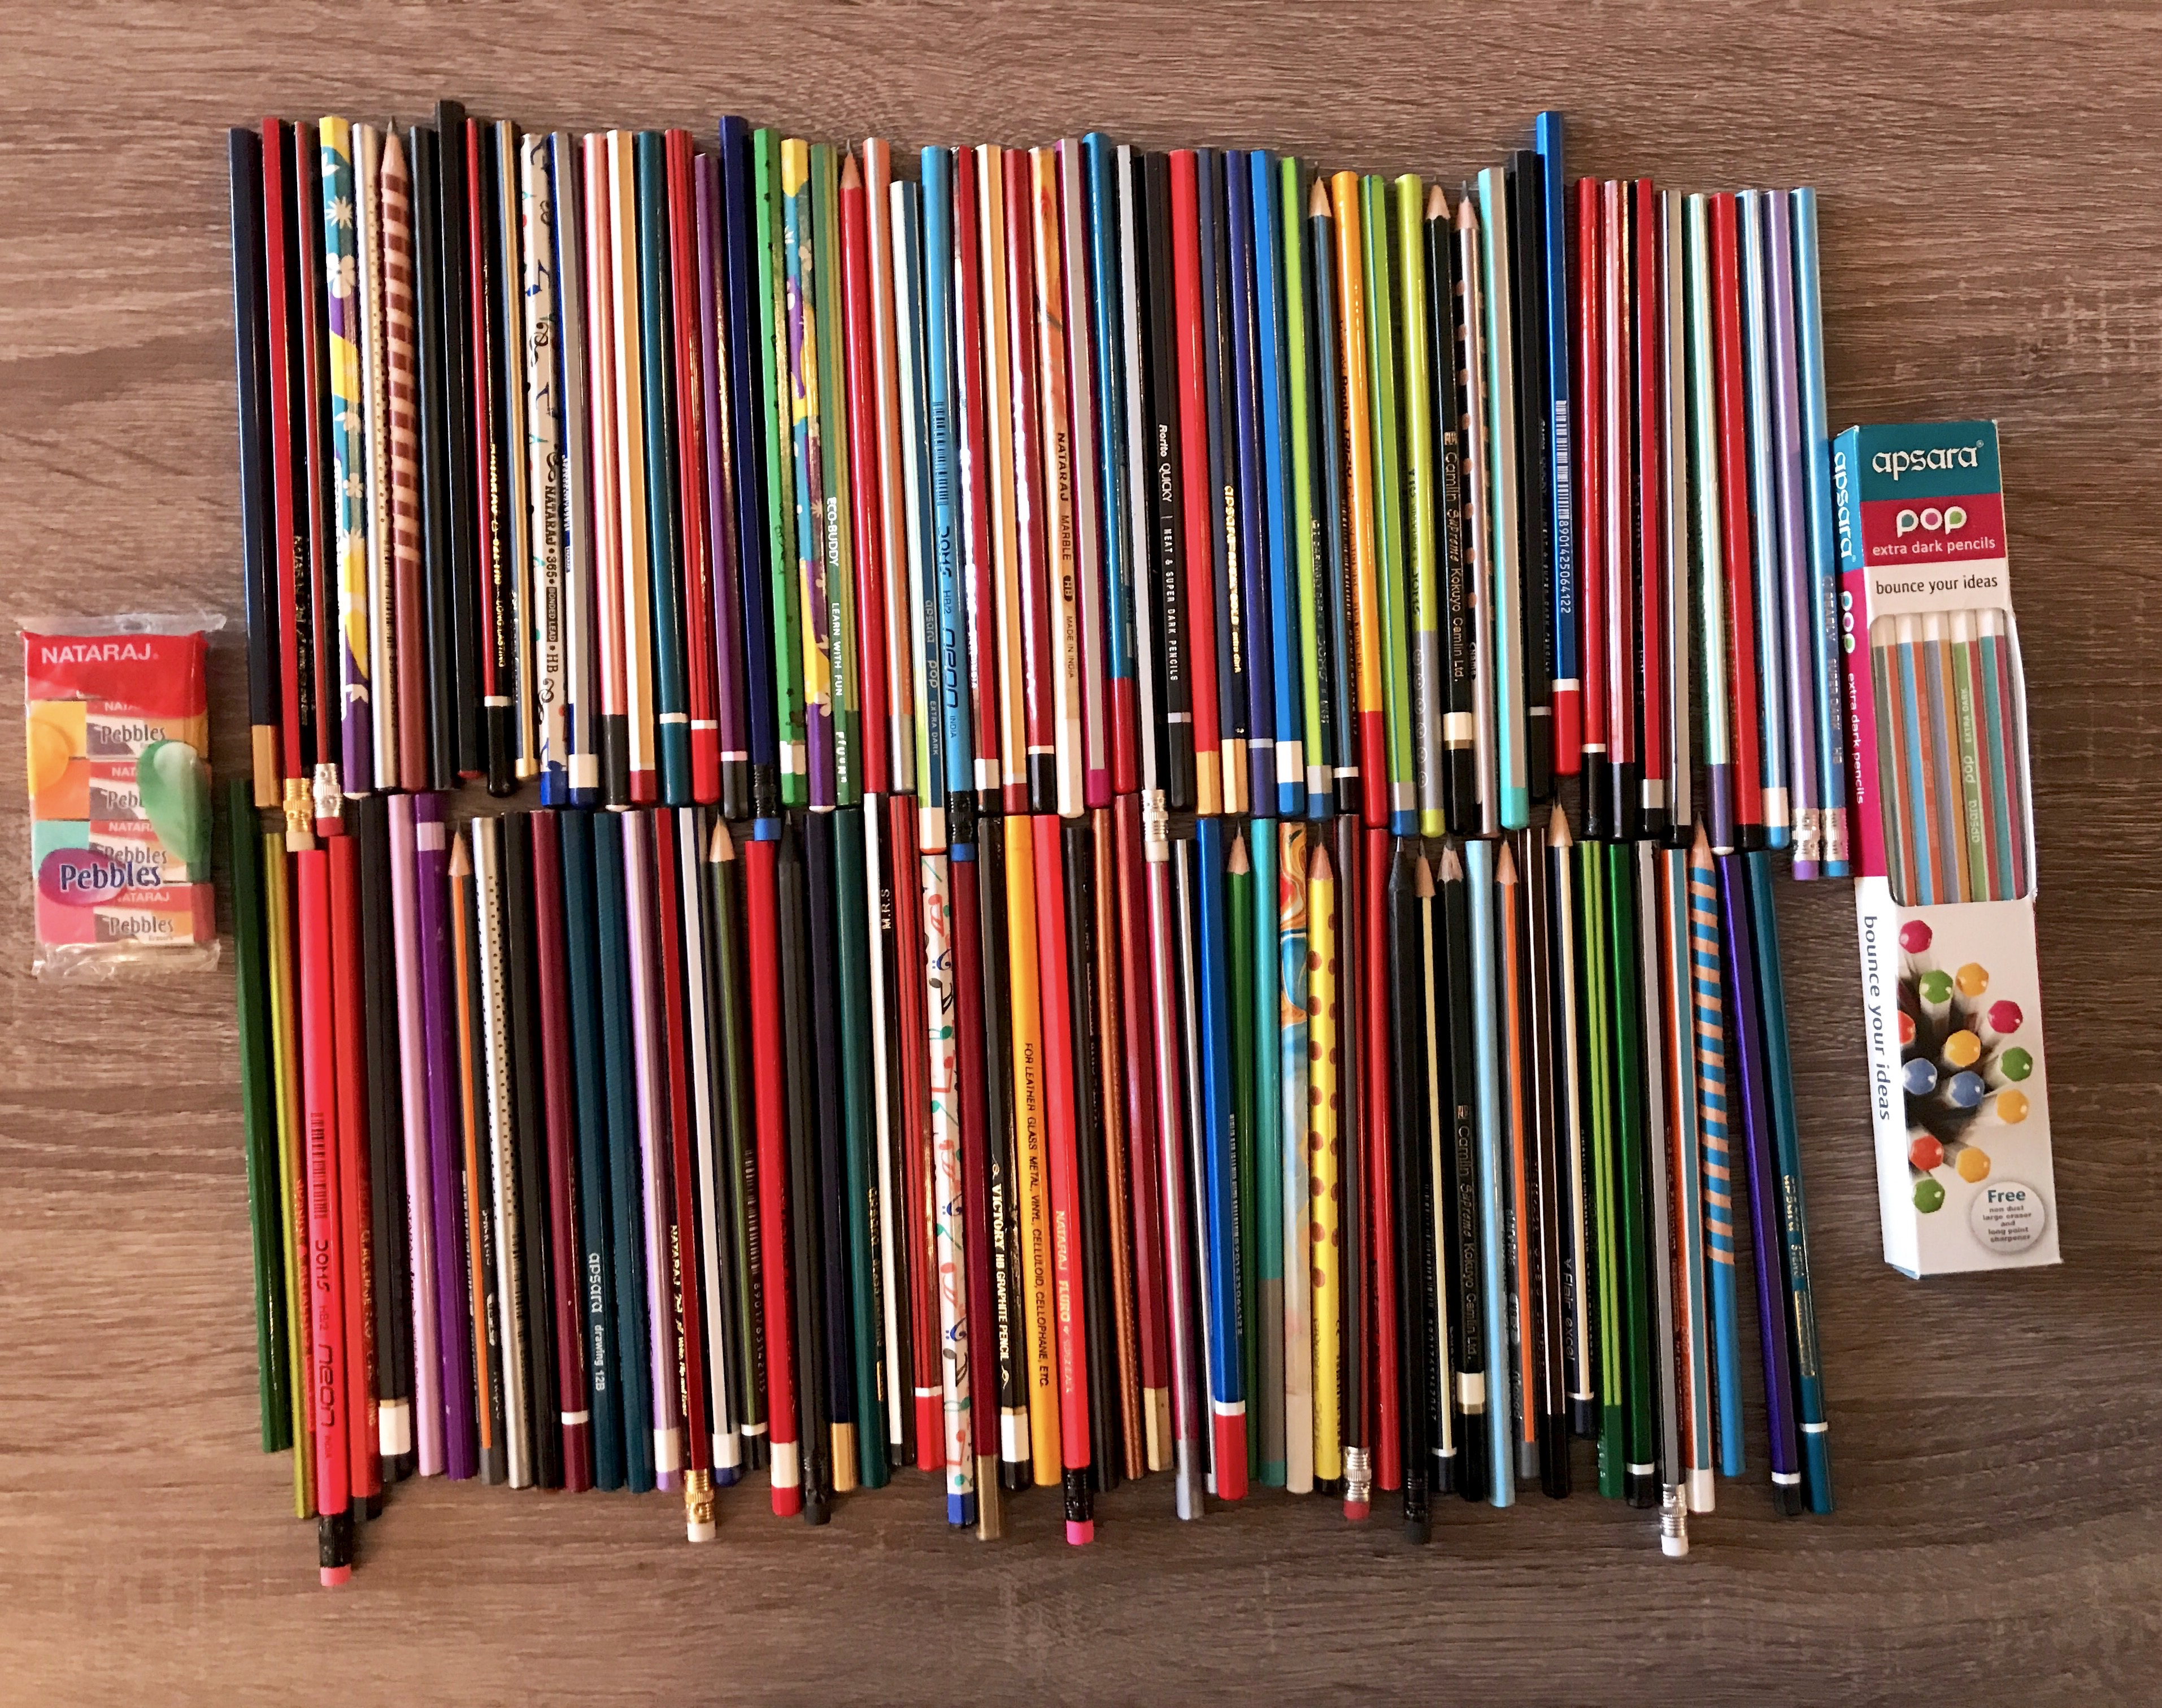 The full selection of what came in my package from The Curios India. All this for only $14.50! I ordered the 10-pack of Apsara Pop pencils separately.